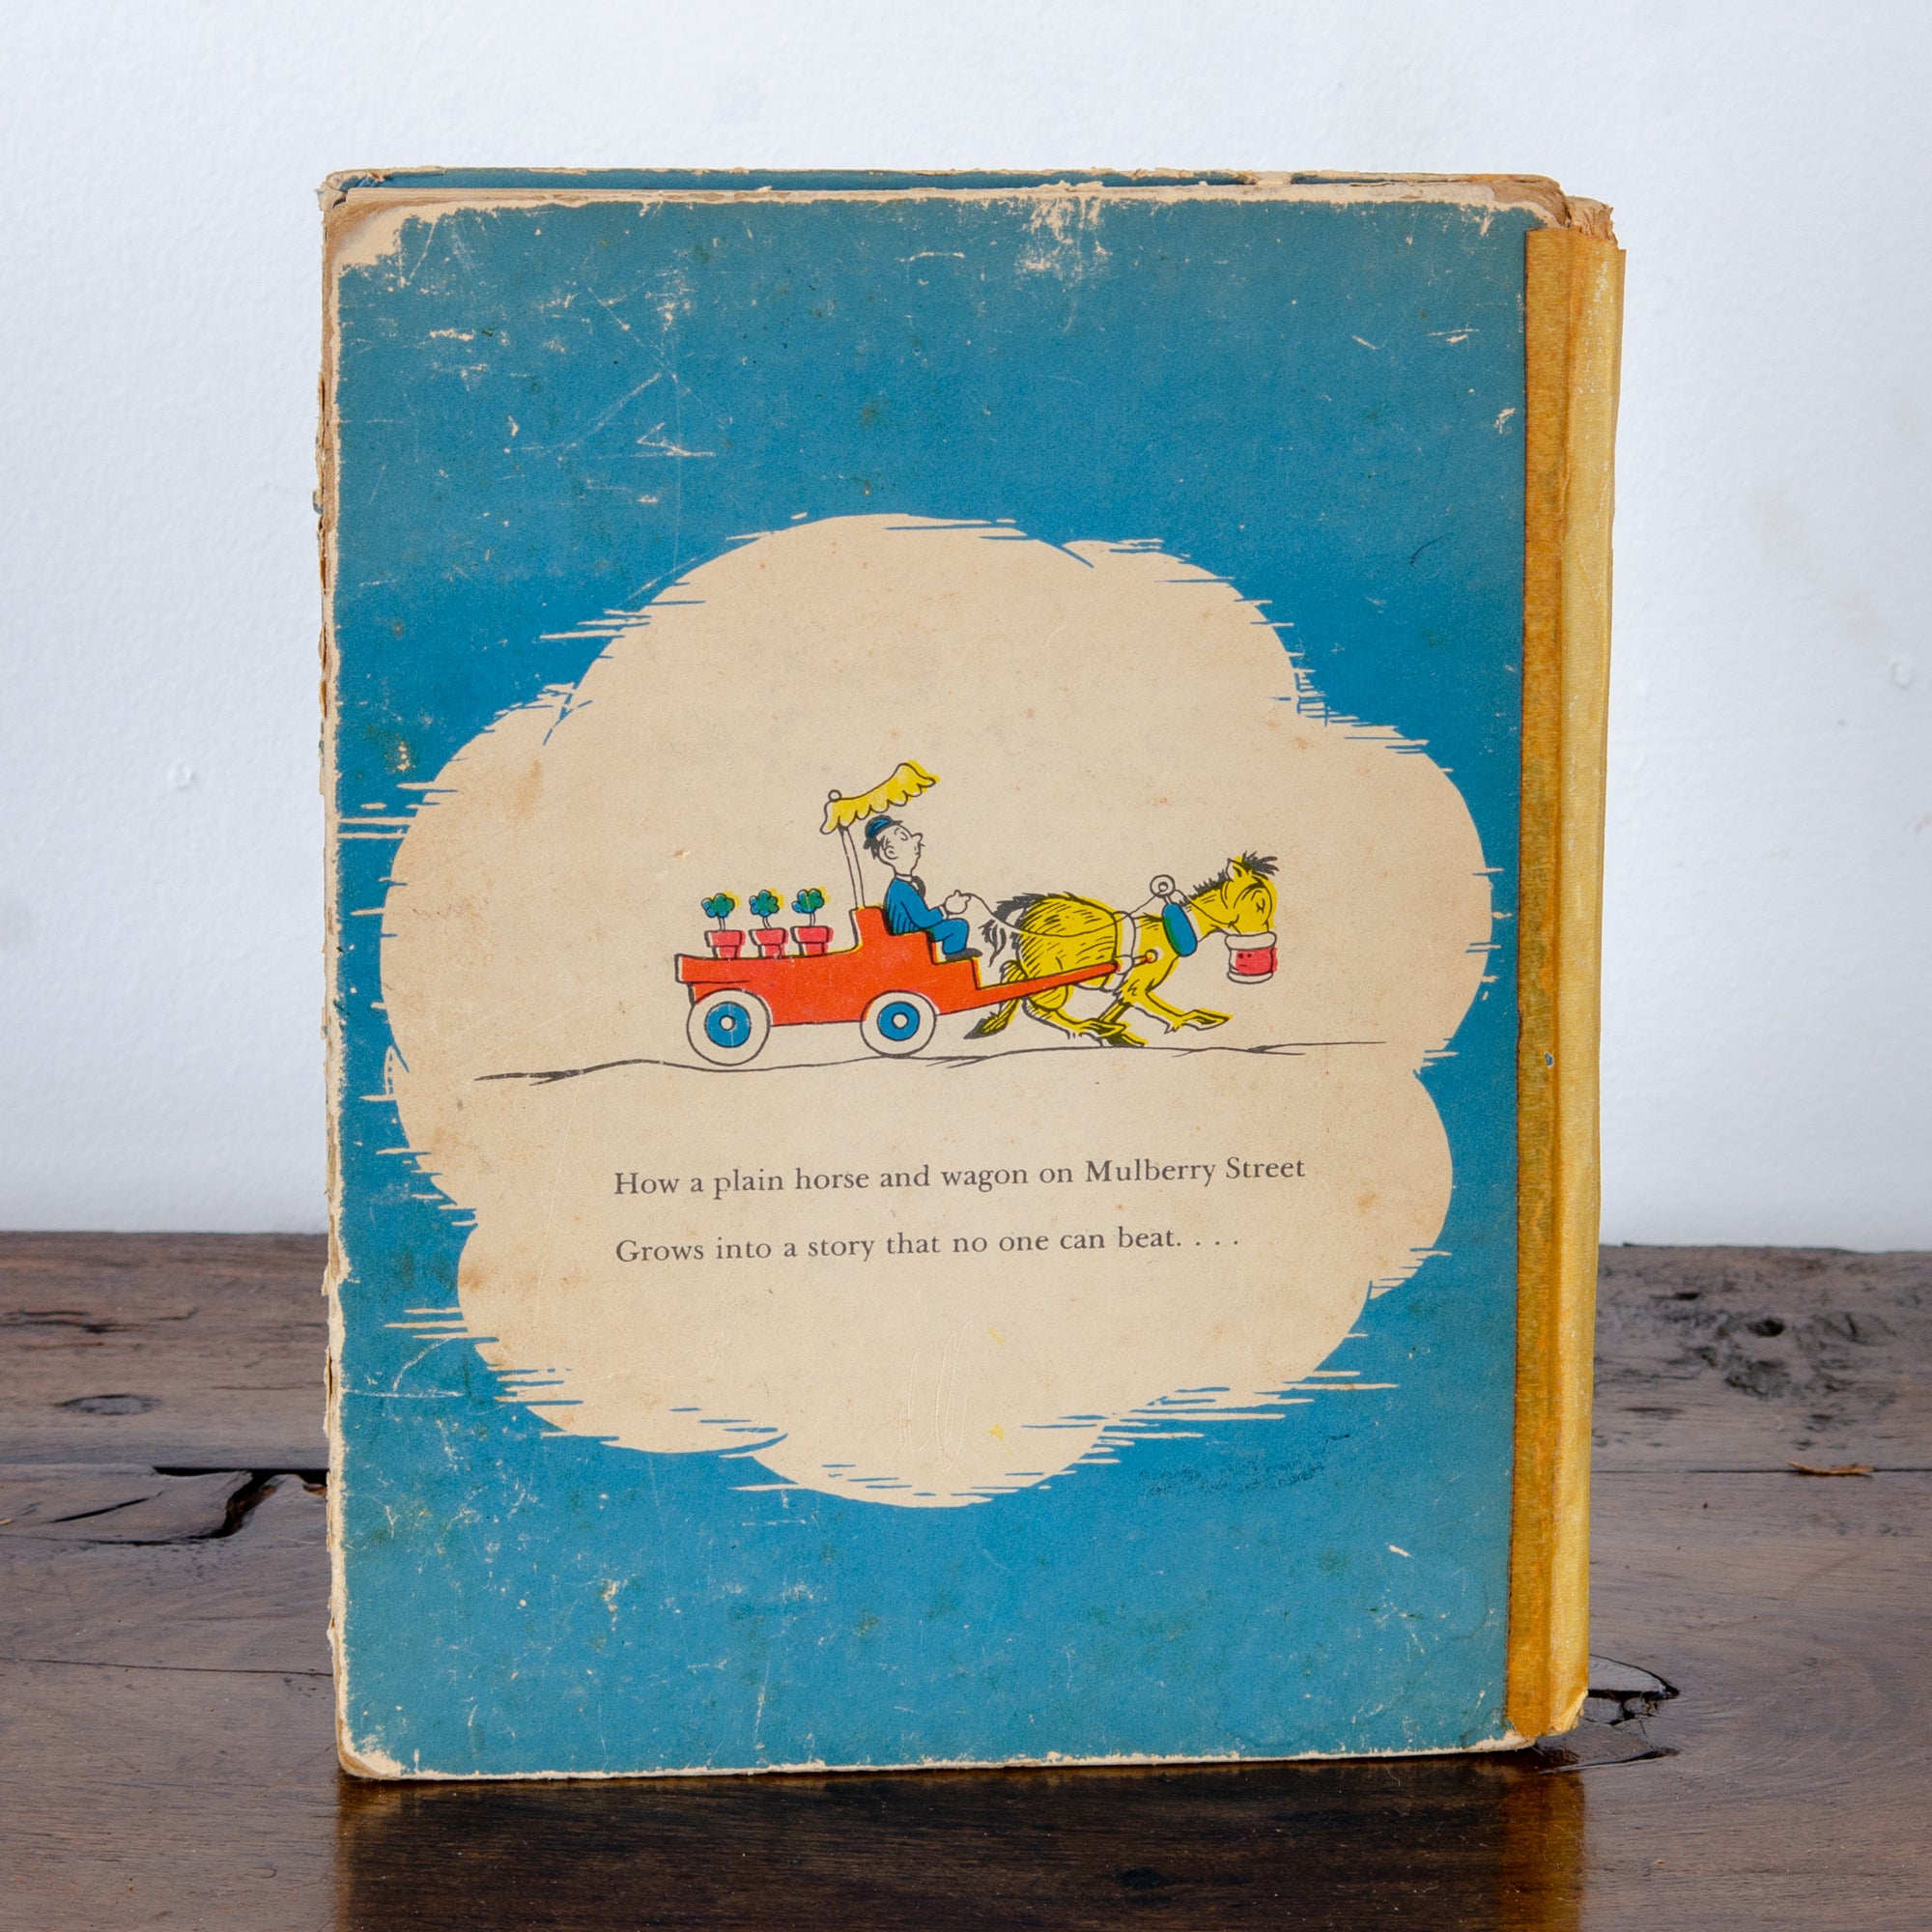 Dr. Suess Signed First Edition ‘And To Think That I Saw It On Mulberry Street'